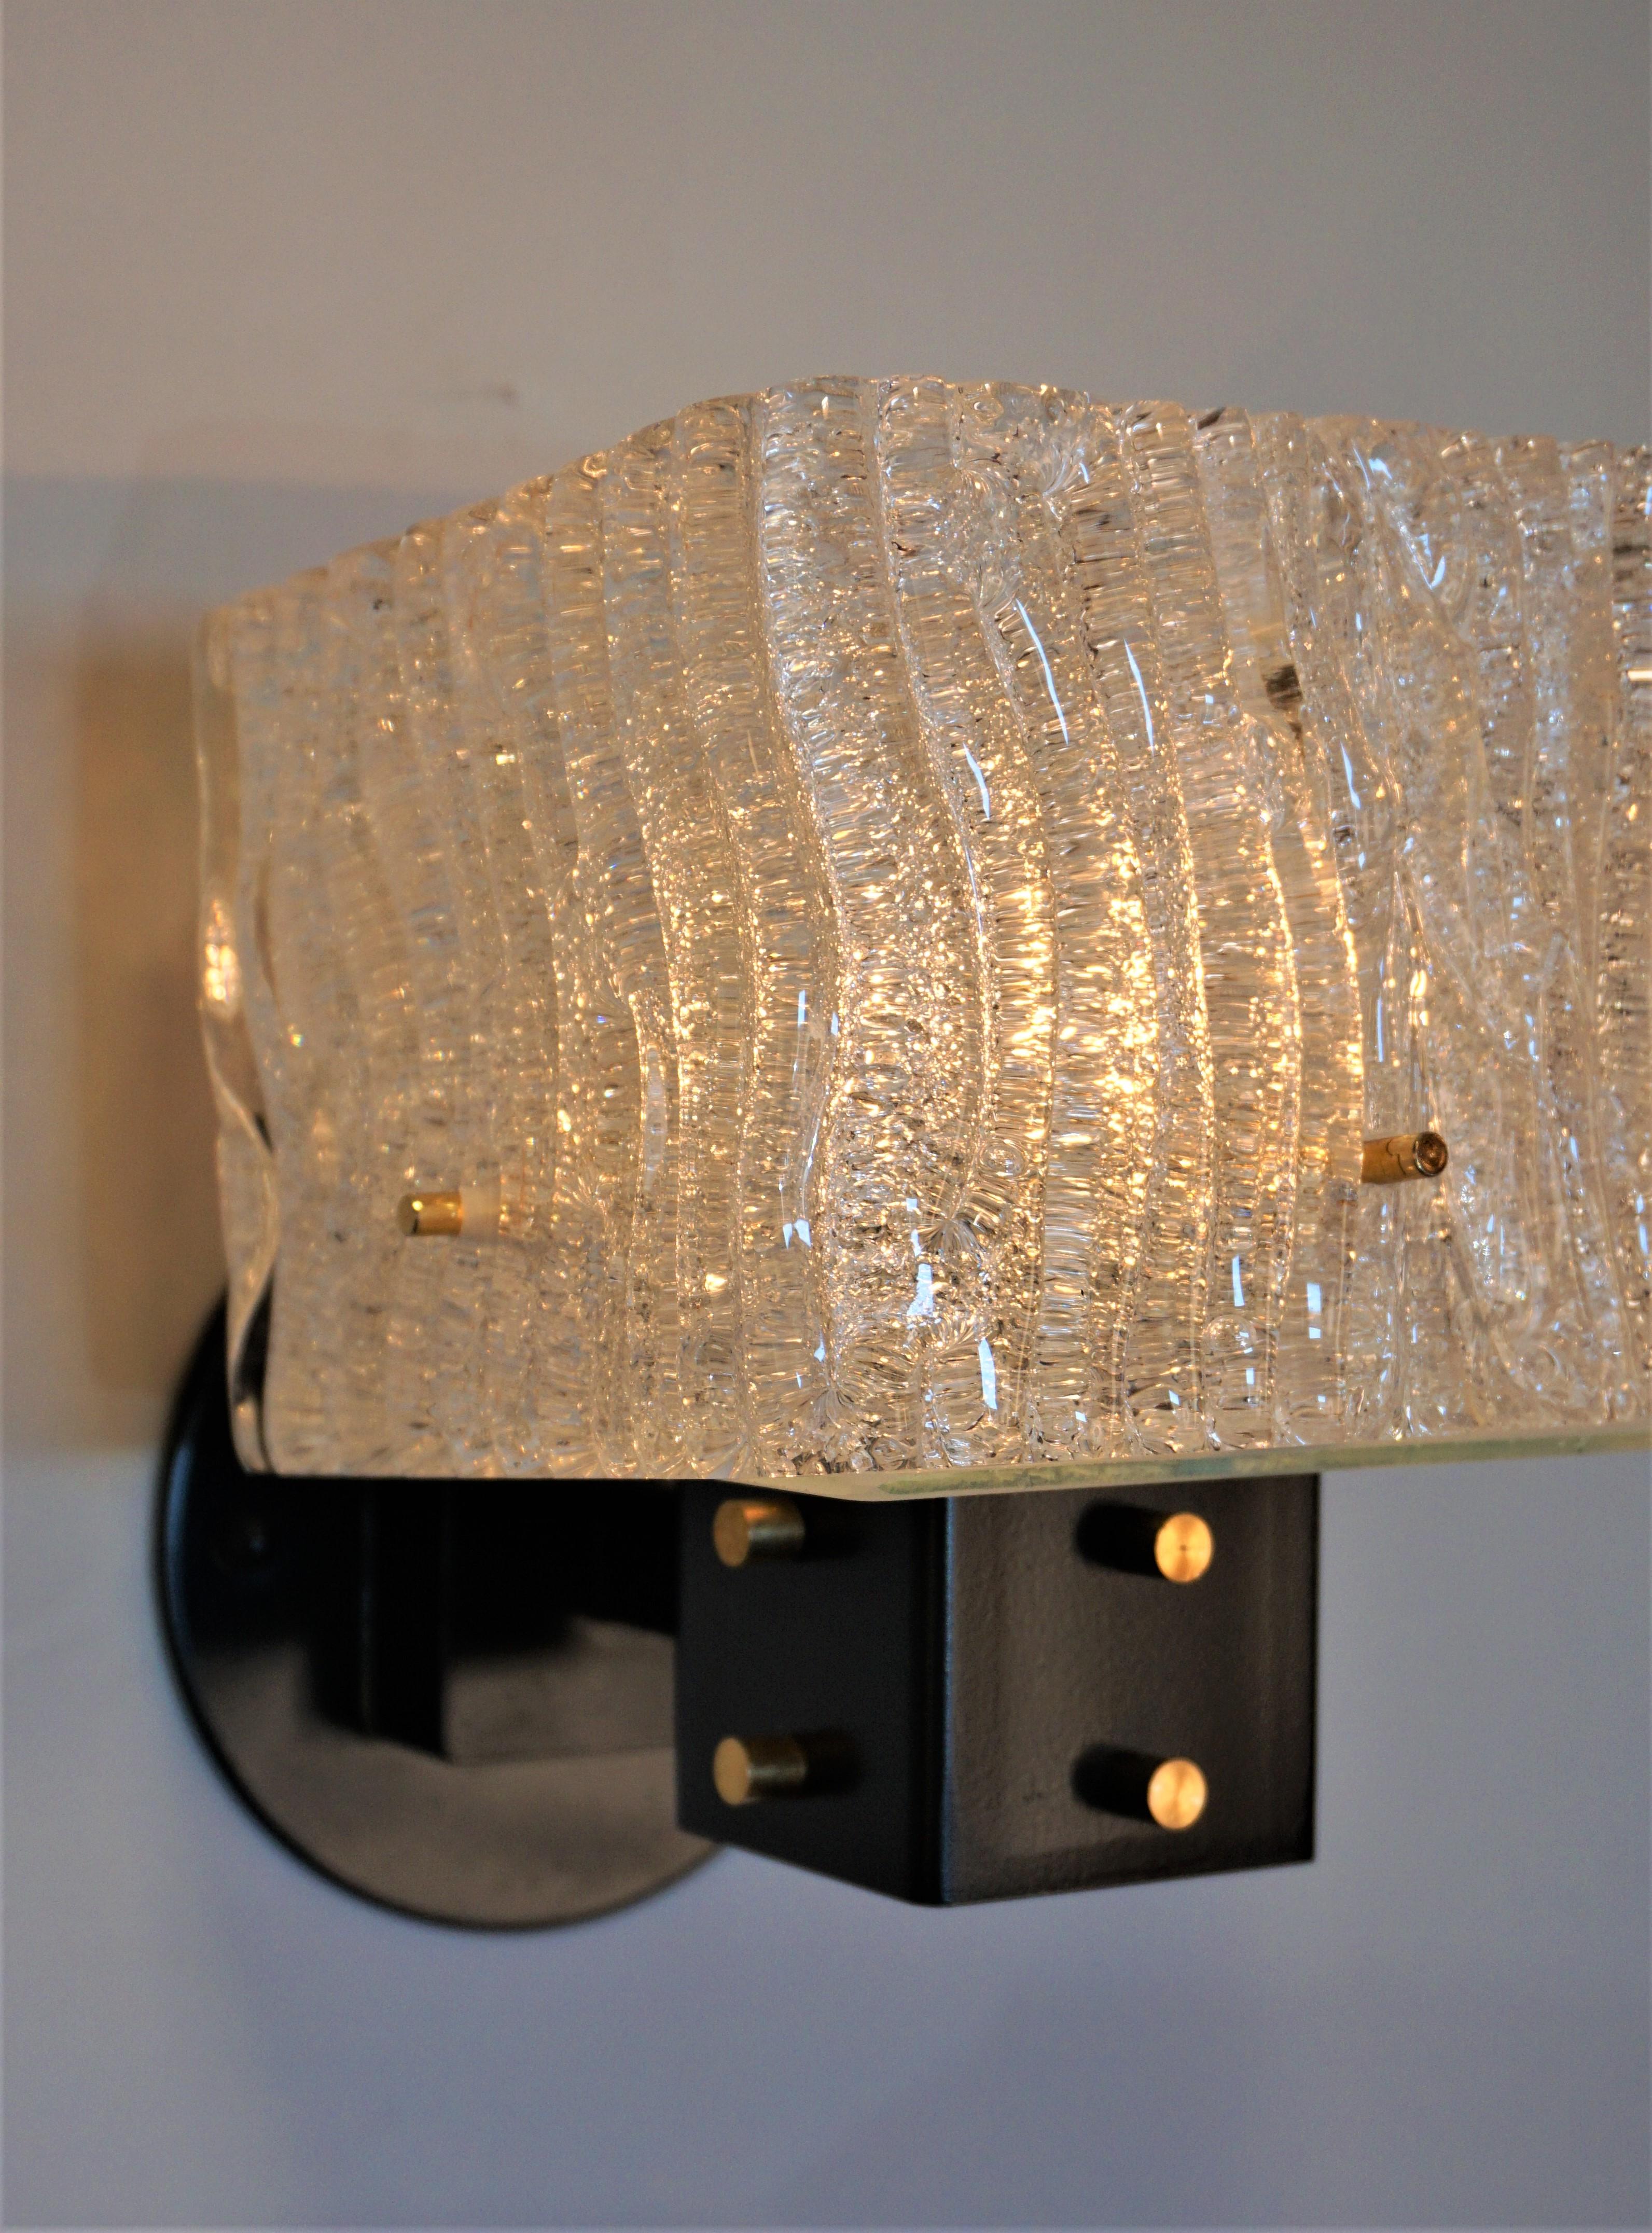 Pair of 1960's Italian texture hand blown glass and black lacquer frame wall sconces.
Matching chandelier Ref: LU913623196712.